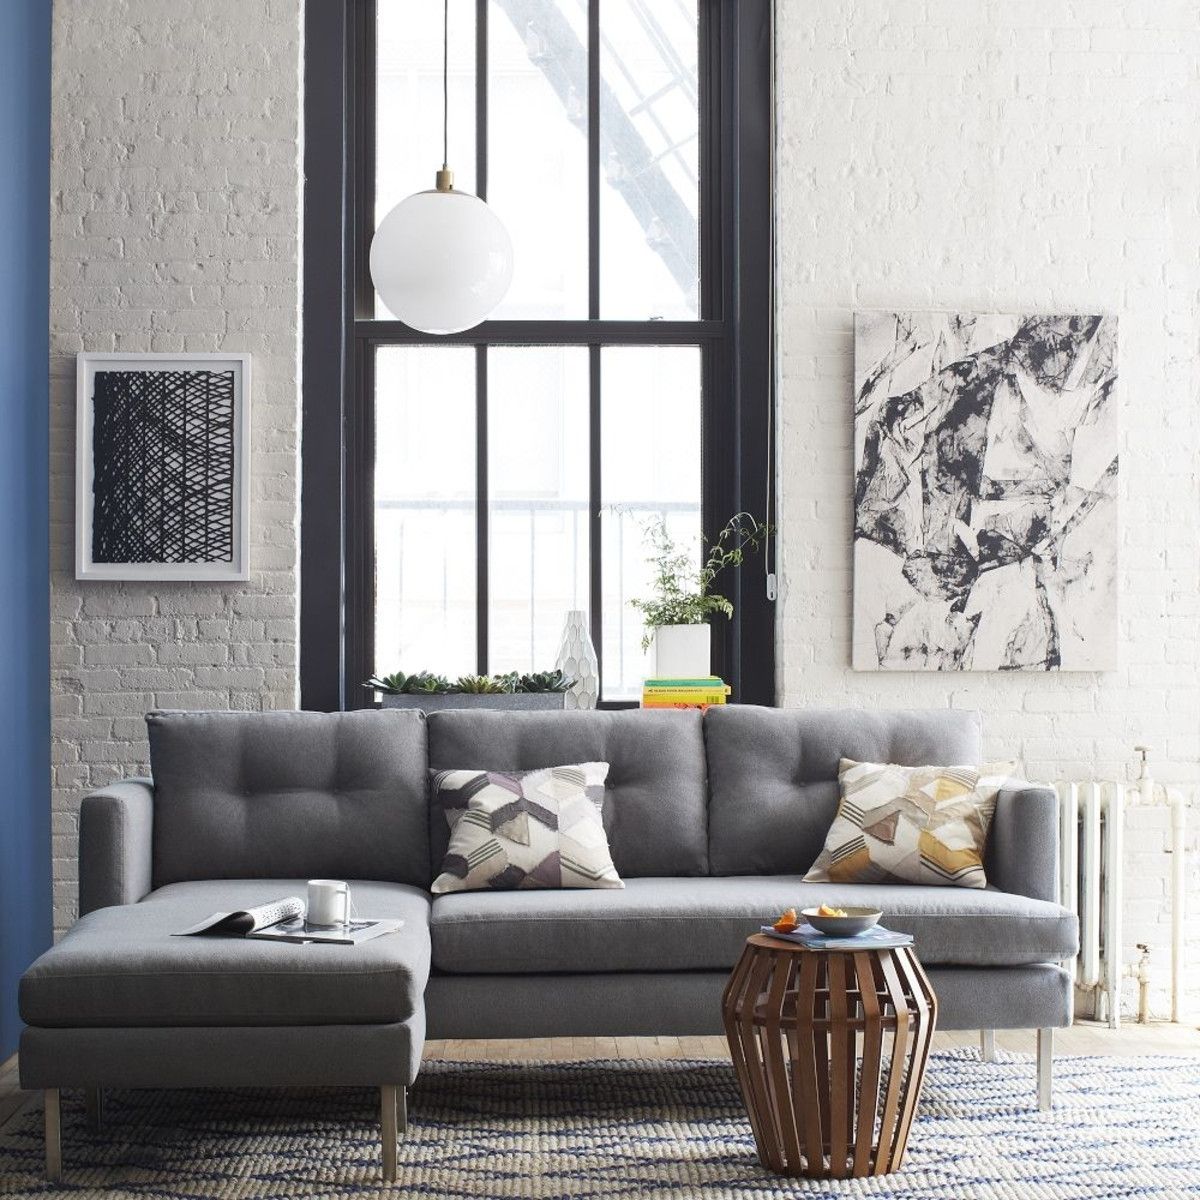 Jackson 2 Piece Chaise Sectional – Heather Grey Aud1809 | West Elm Regarding West Elm Sectional Sofas (Photo 4 of 10)